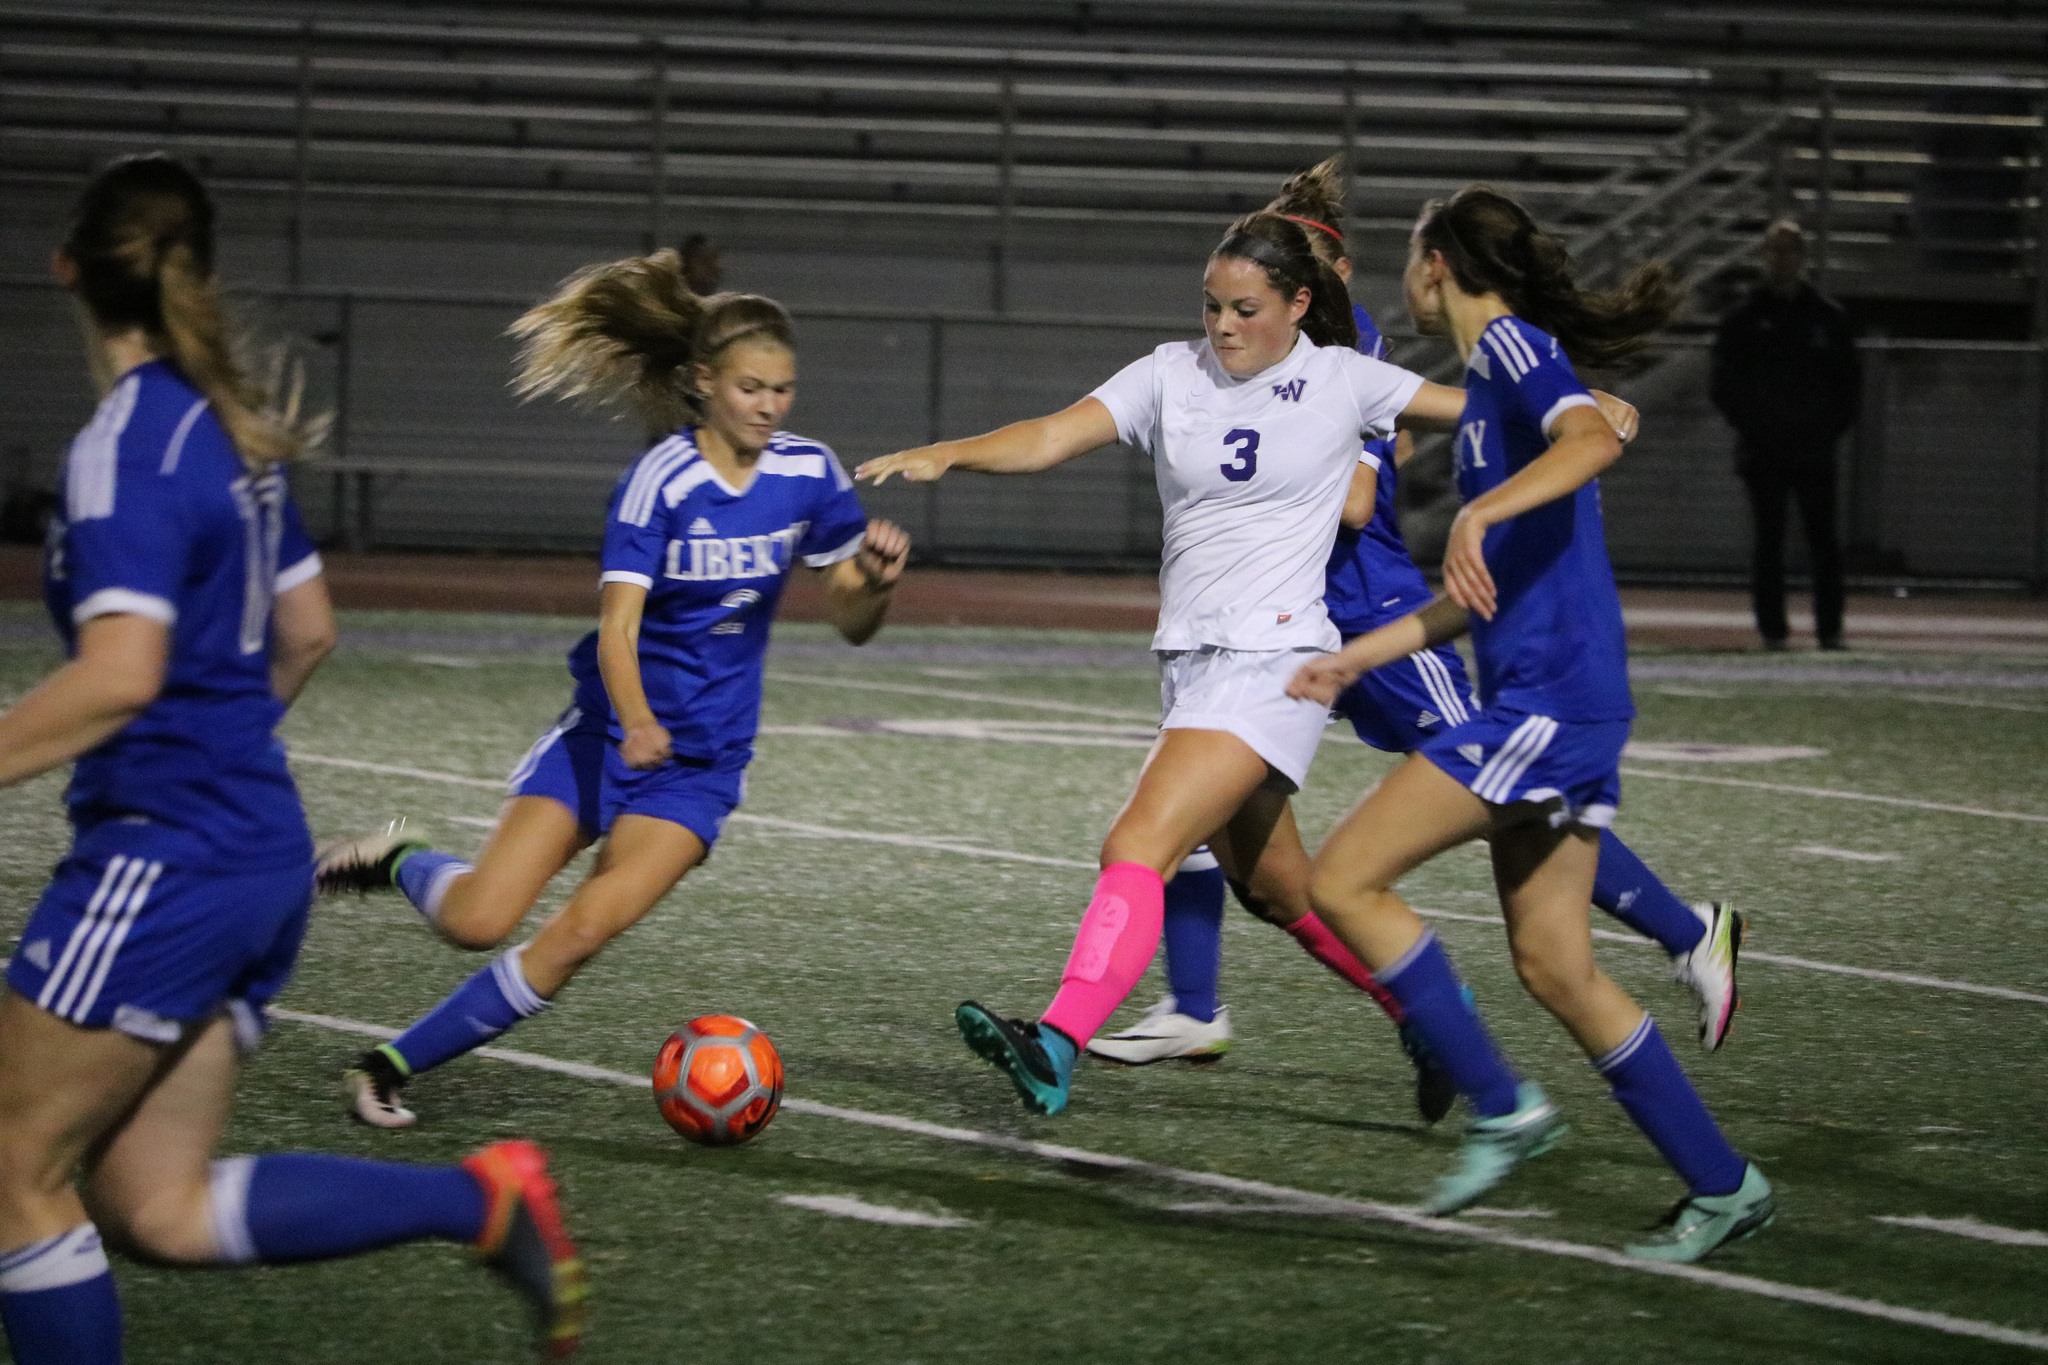 Lake Washington senior Natalie Vetto is surrounded by defenders during the Kangs’ 2-1 loss to Liberty on Thursday at Mac Field in Kirkland. JOHN WILLIAM HOWARD/Kirkland Reporter